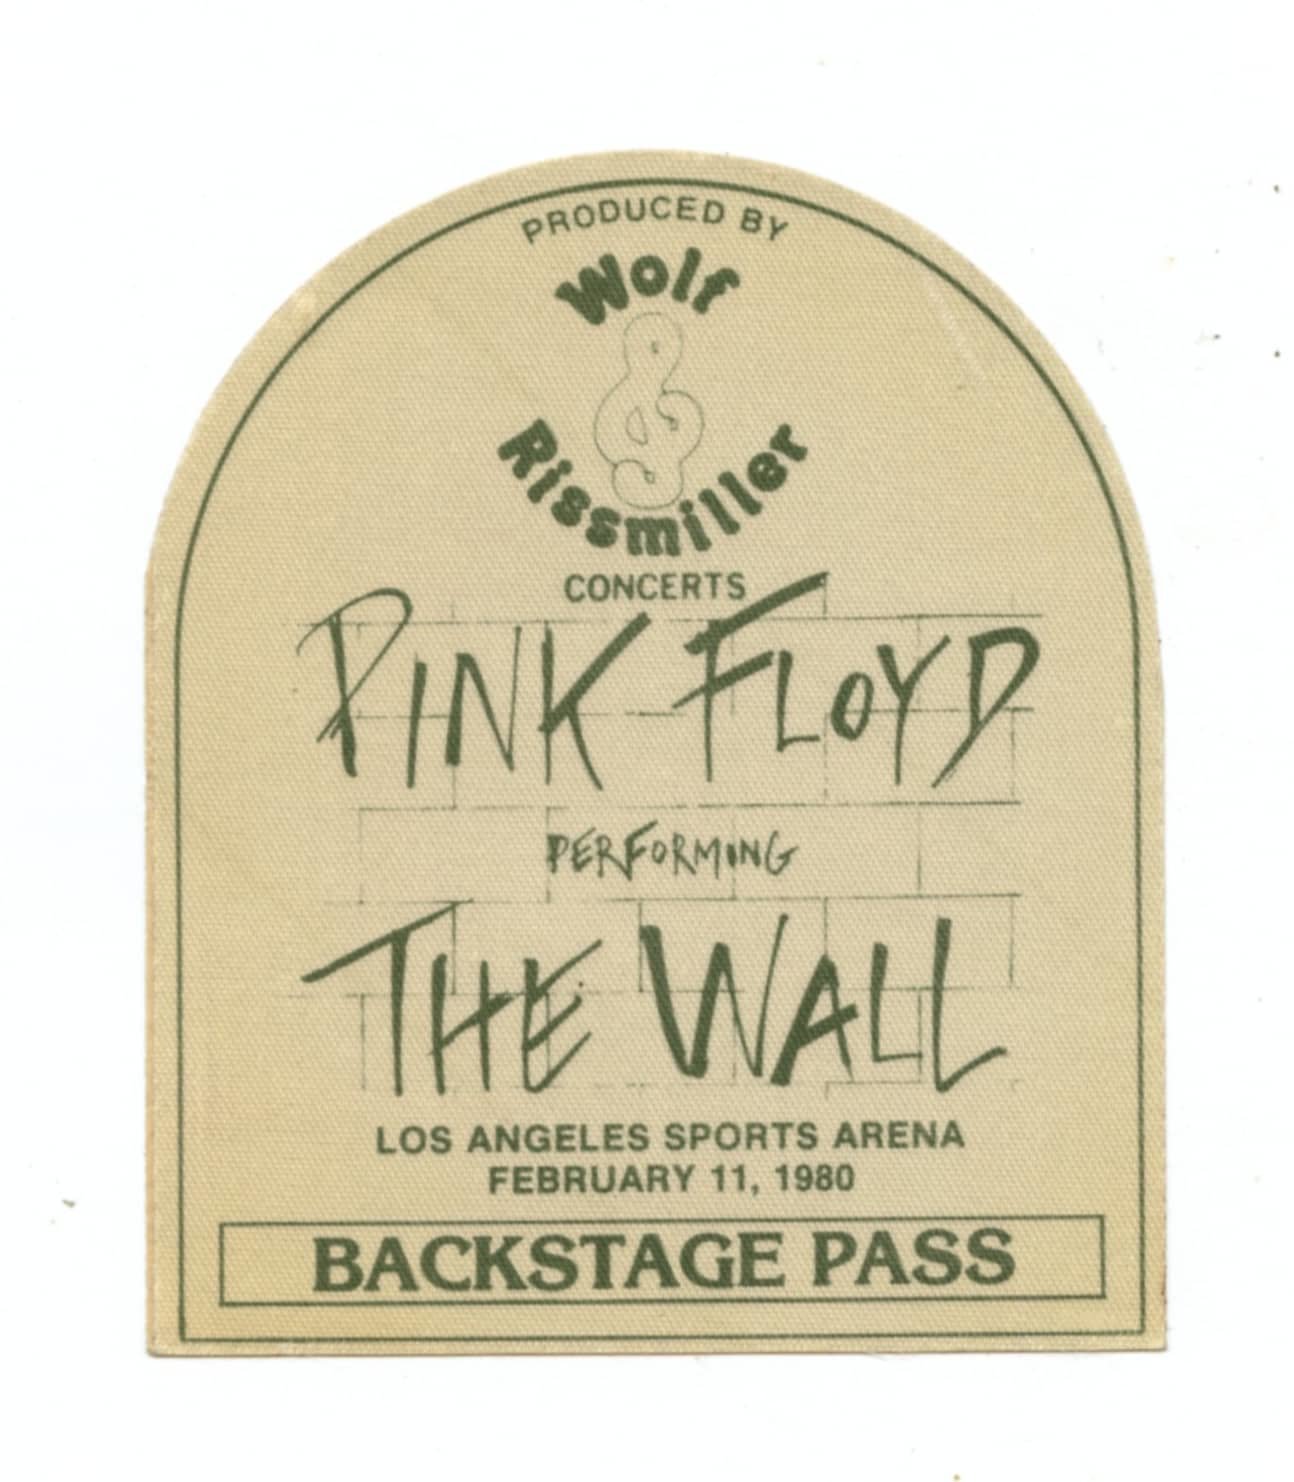 Pink Floyd Backstage Pass 1980 Feb 11 Los Angeles Sports Arena The Wall Tour